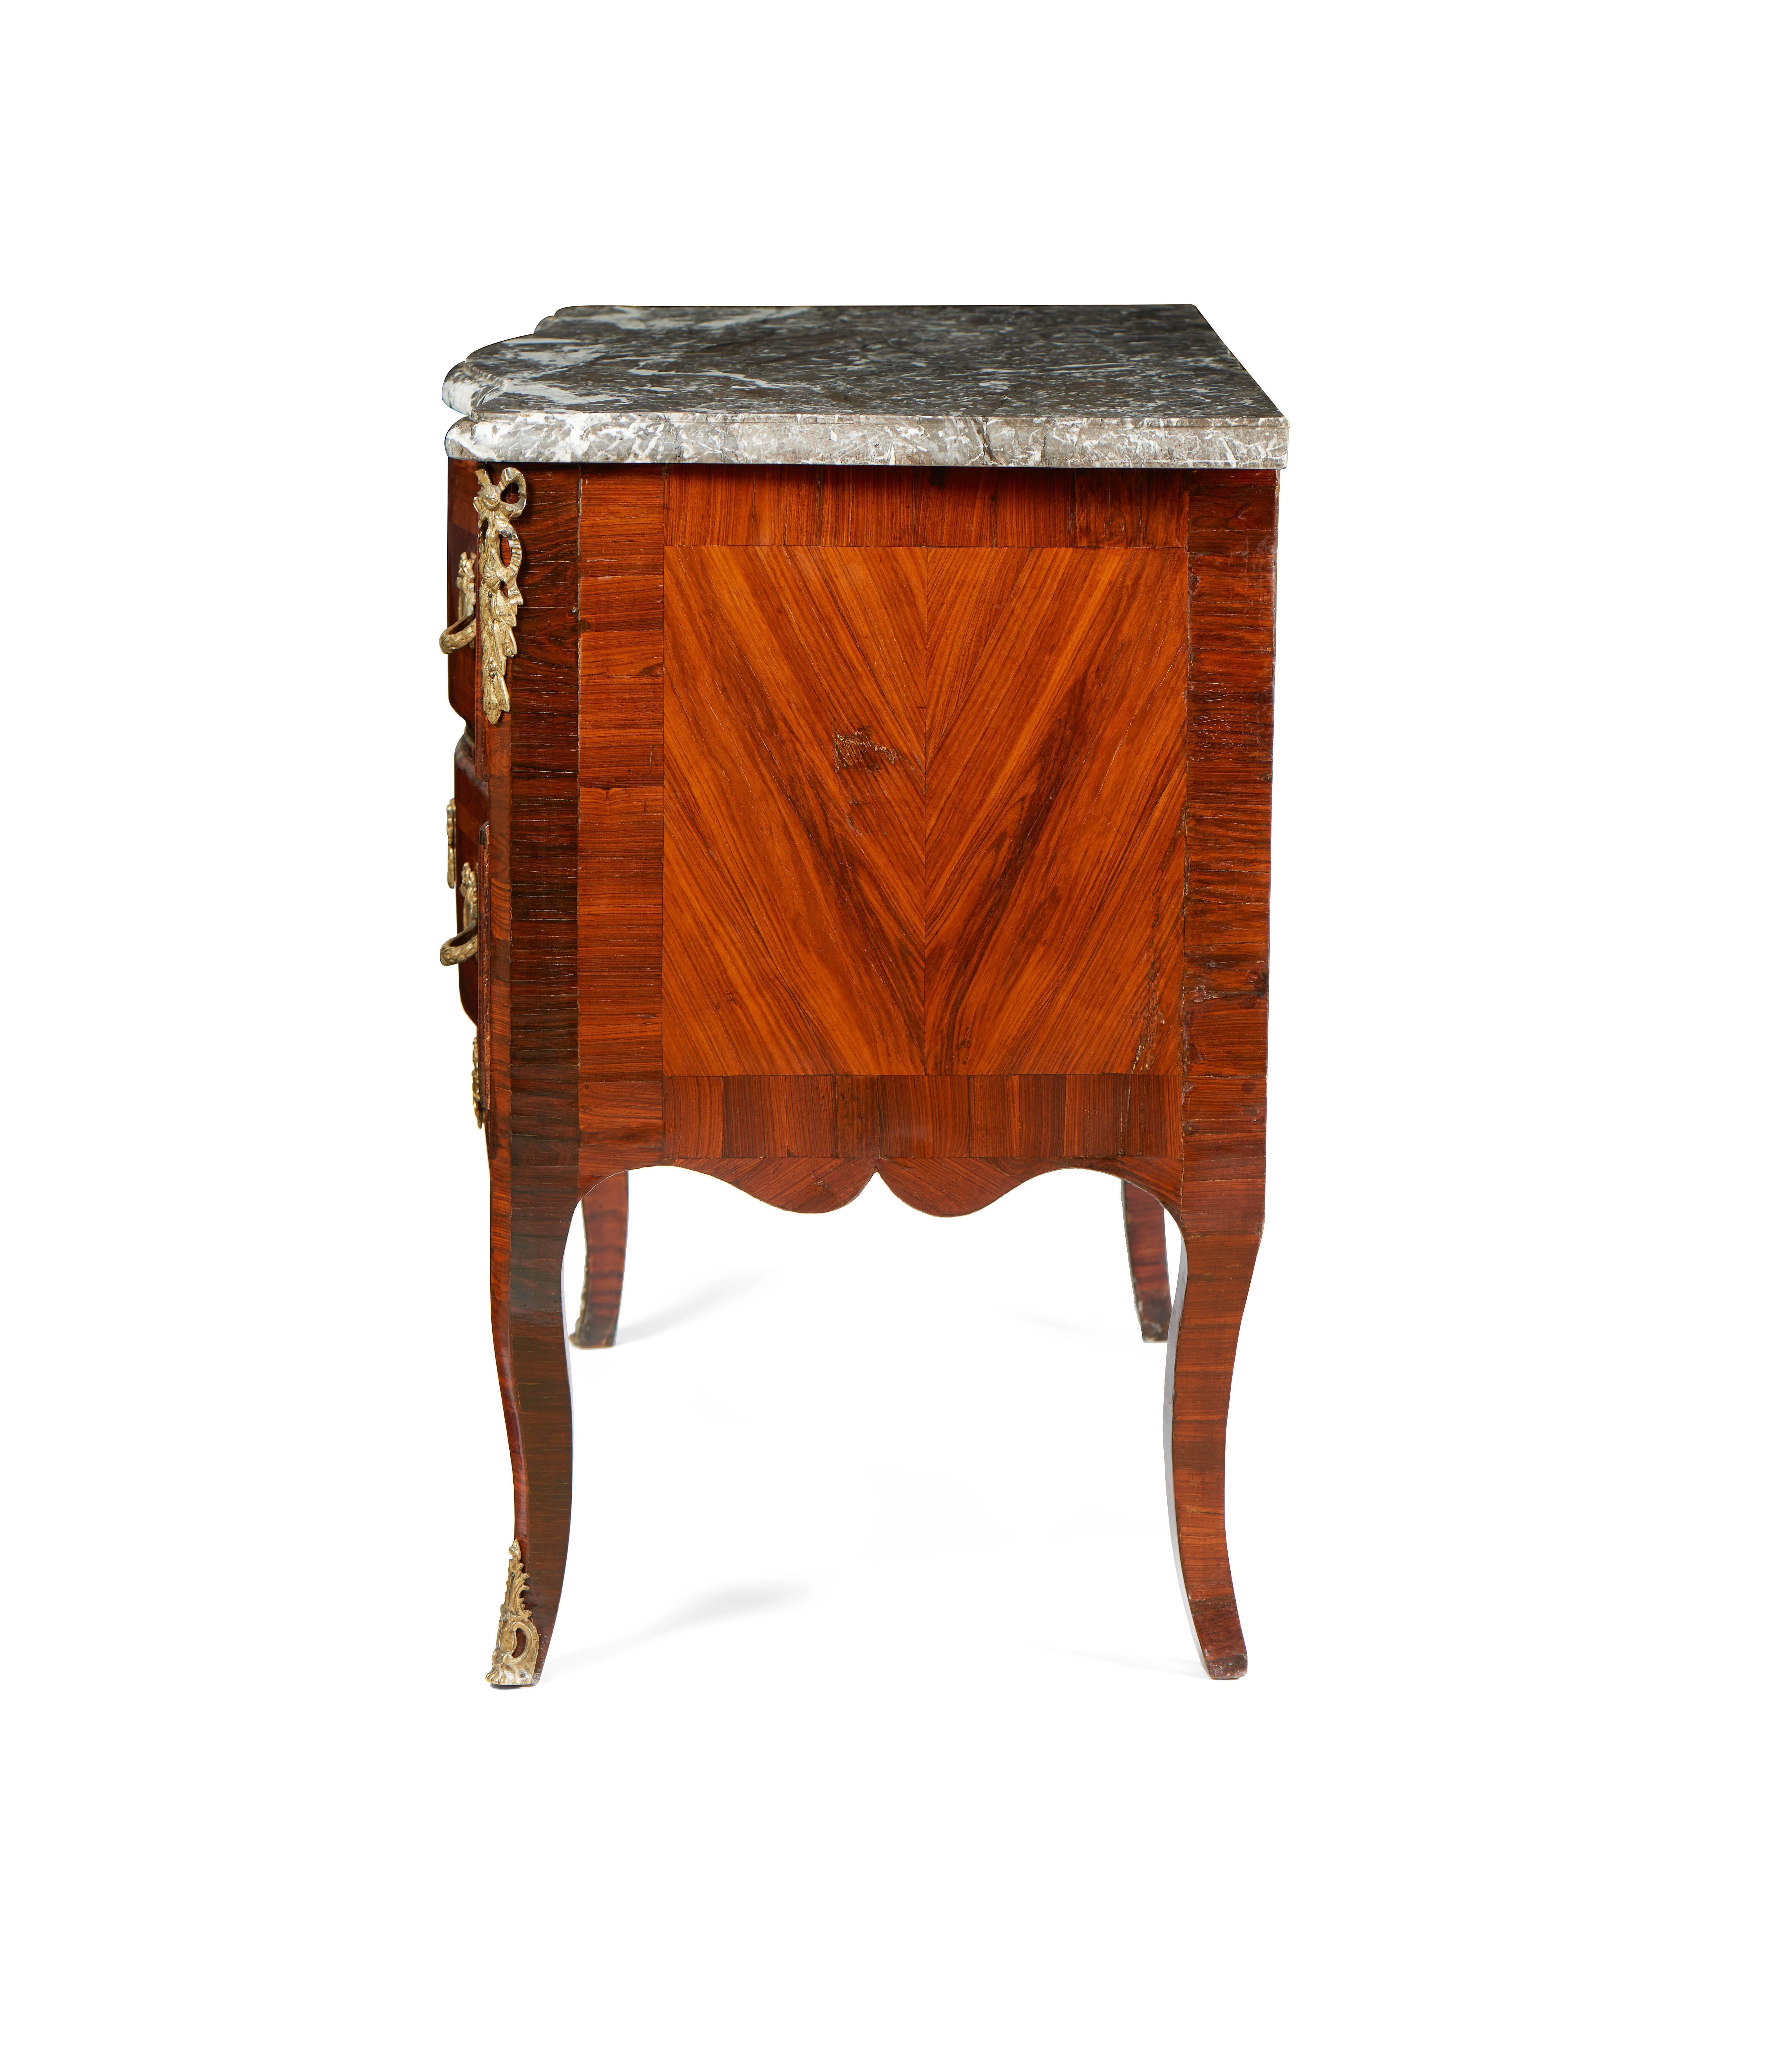 For sale on 1stdibs a fine rosewood Louis XV transition Louis XVI bronze-mounted chest of drawers with marble top. With two sided drawers and one long drawer this commode has a grey marble top, a fine quality veneered rosewood and all the bronzes